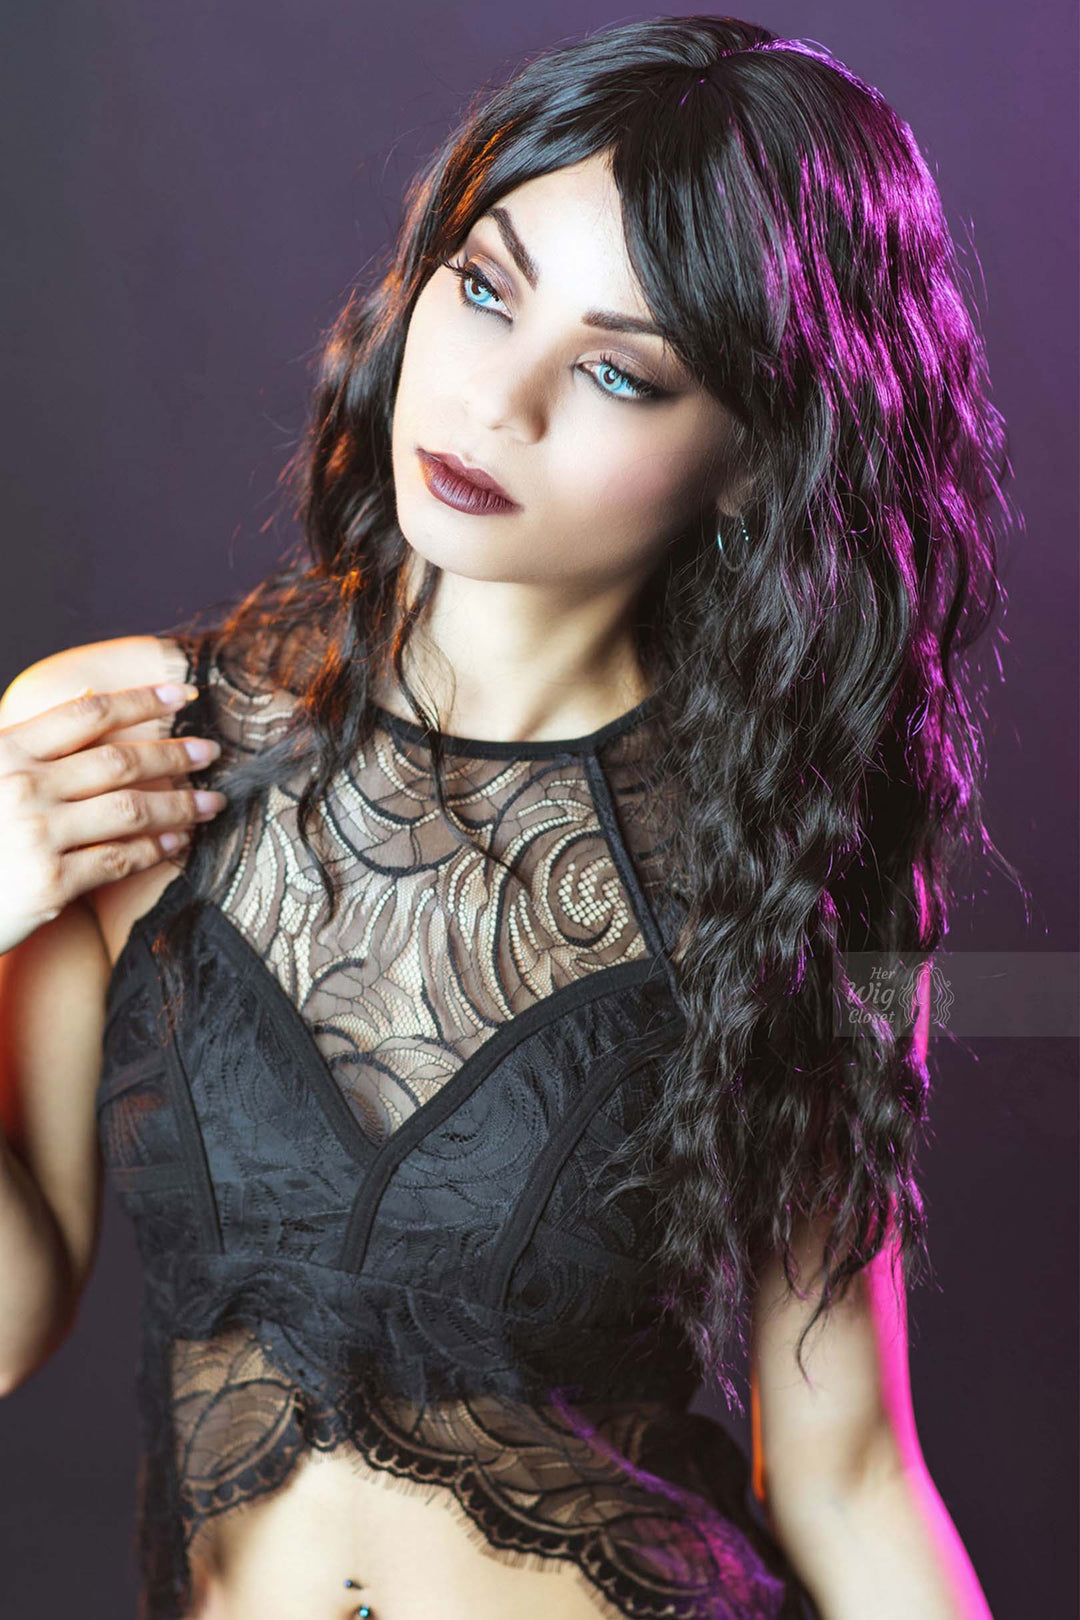 Emily | Black Loose Wave Wig with Bangs 20"